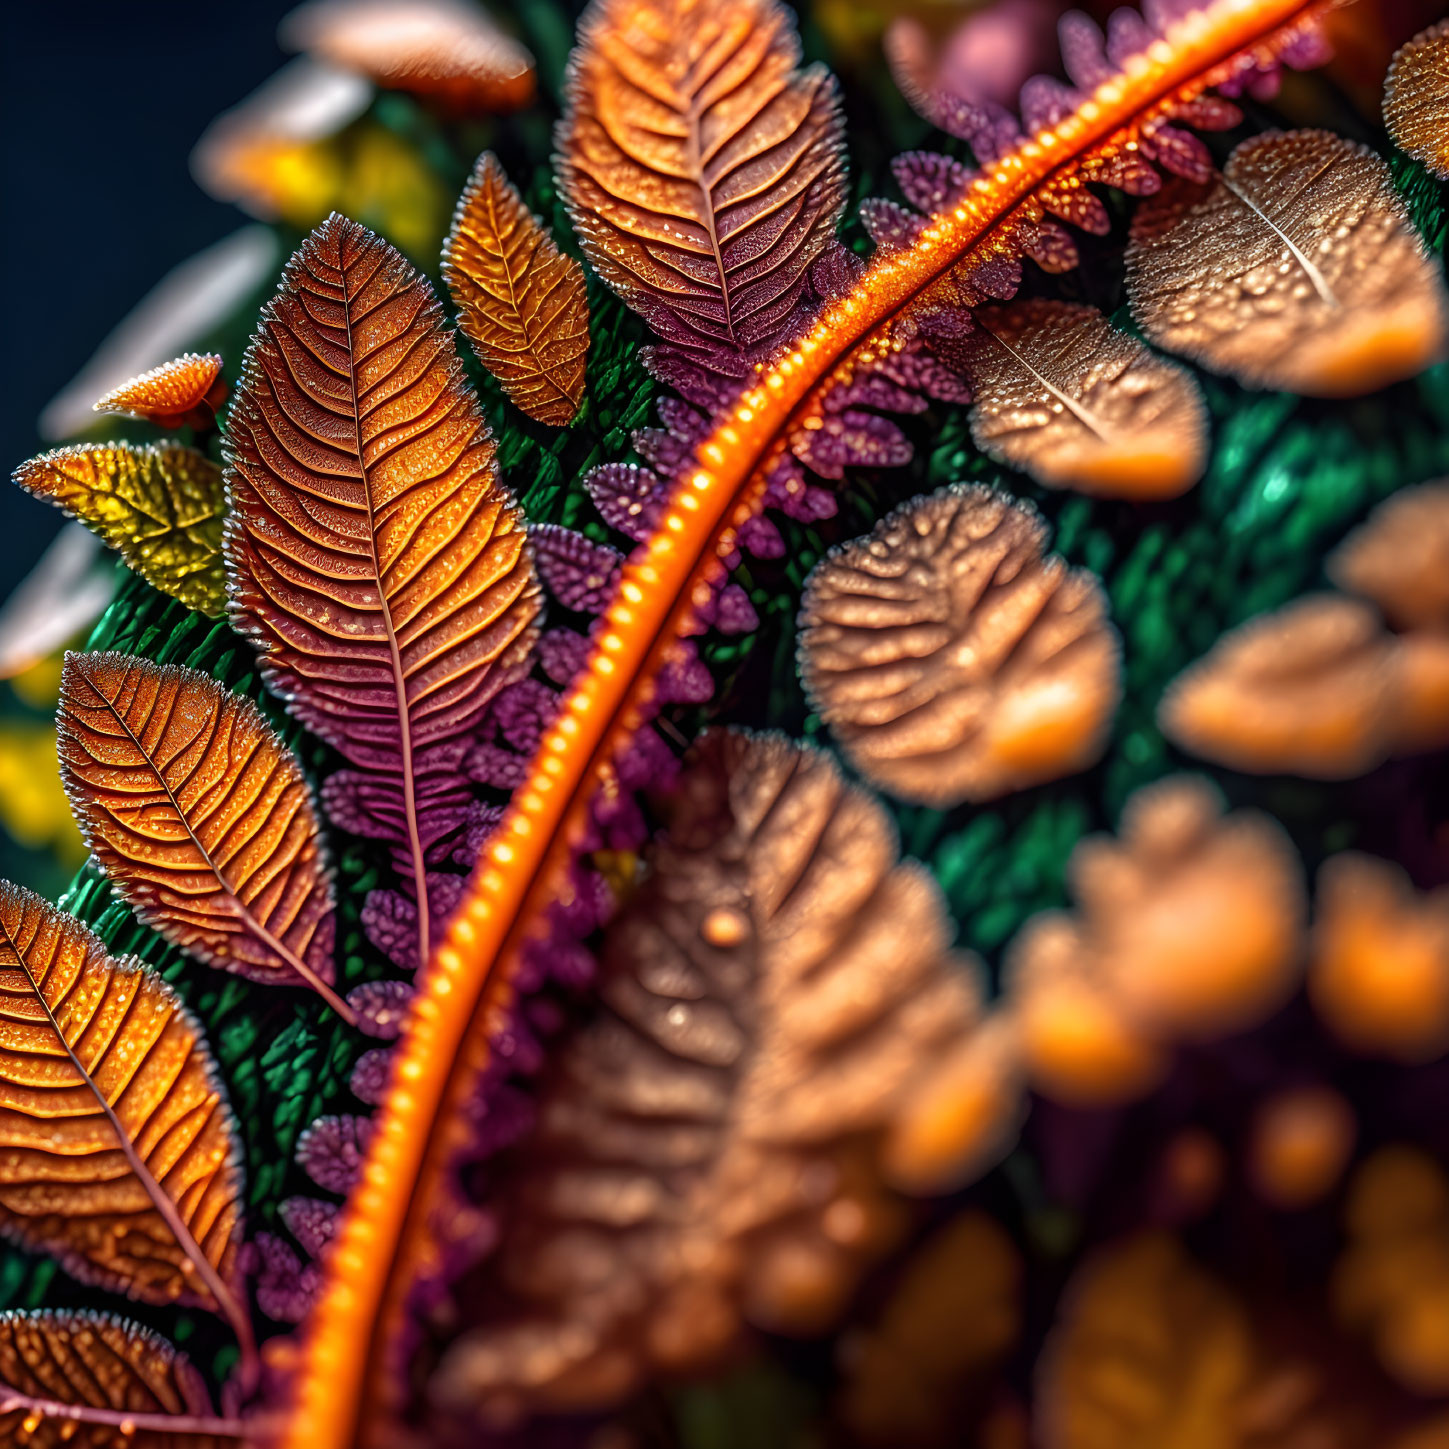 Detailed Close-Up of Vibrant Orange and Green Textured Leaves